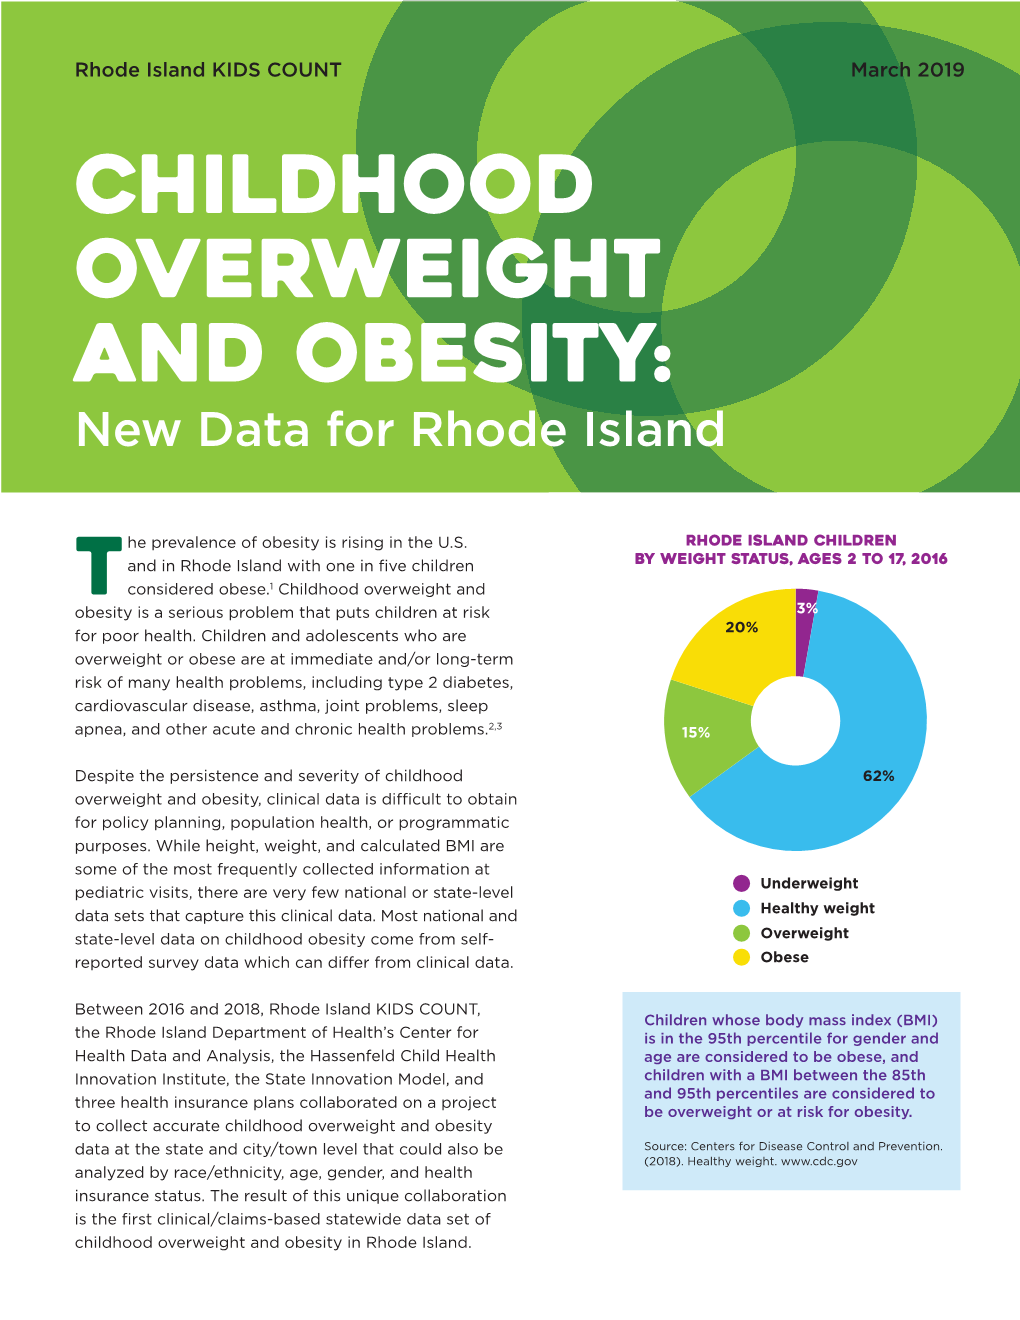 Childhood Overweight and Obesity: New Data for Rhode Island